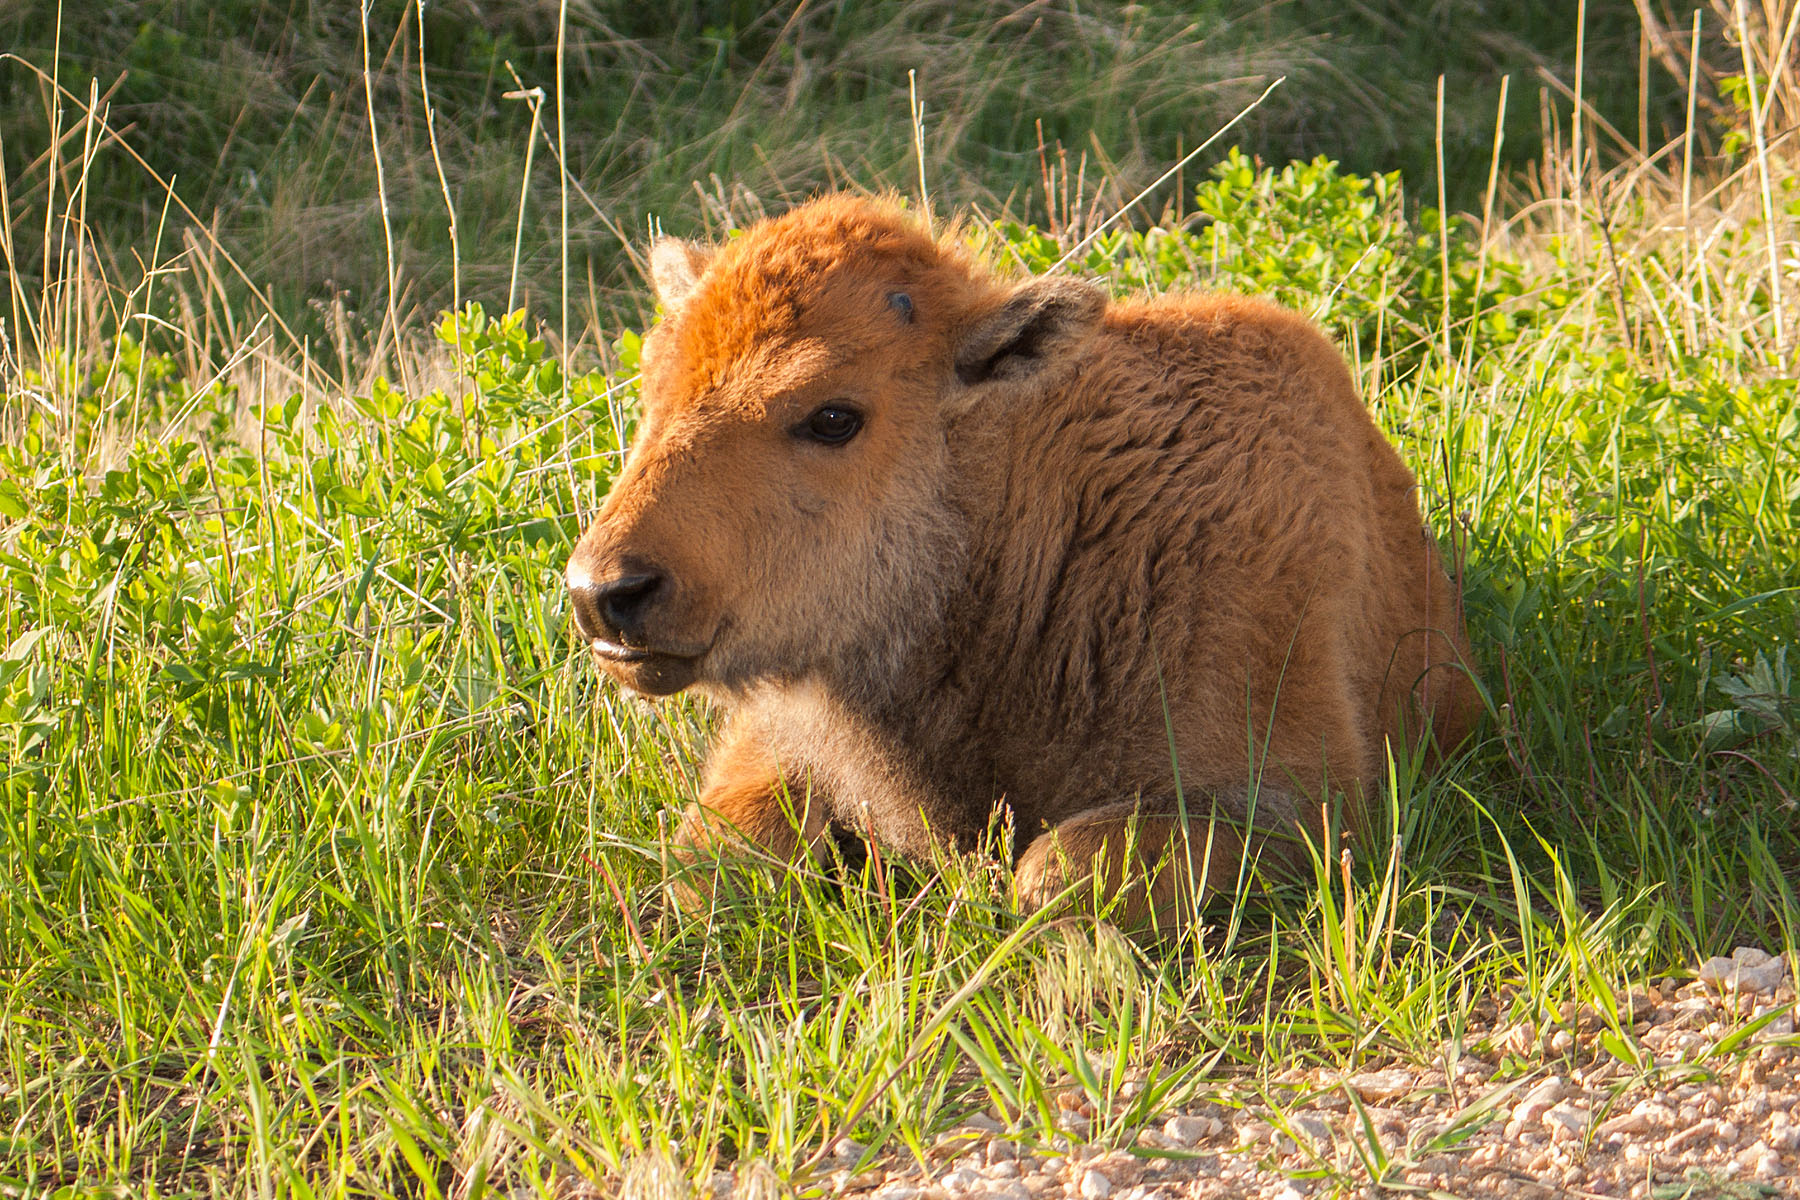 Bison calf, Custer State Park.  Click for next photo.